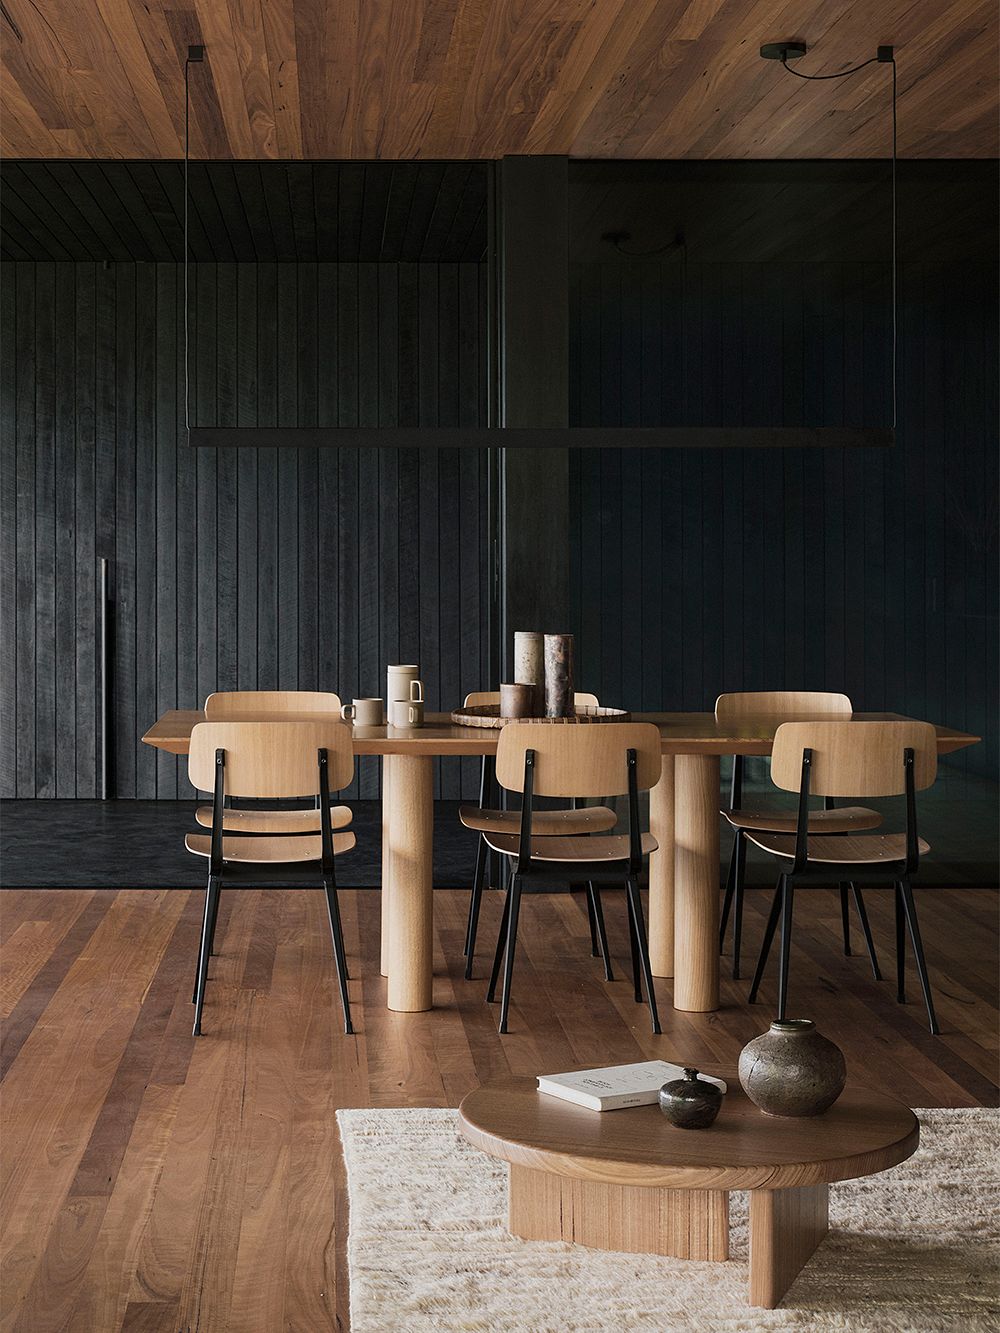 An image of Federal House's dining area, featuring HAY's Result dining chairs around a wooden table, as part of the dining room decor.